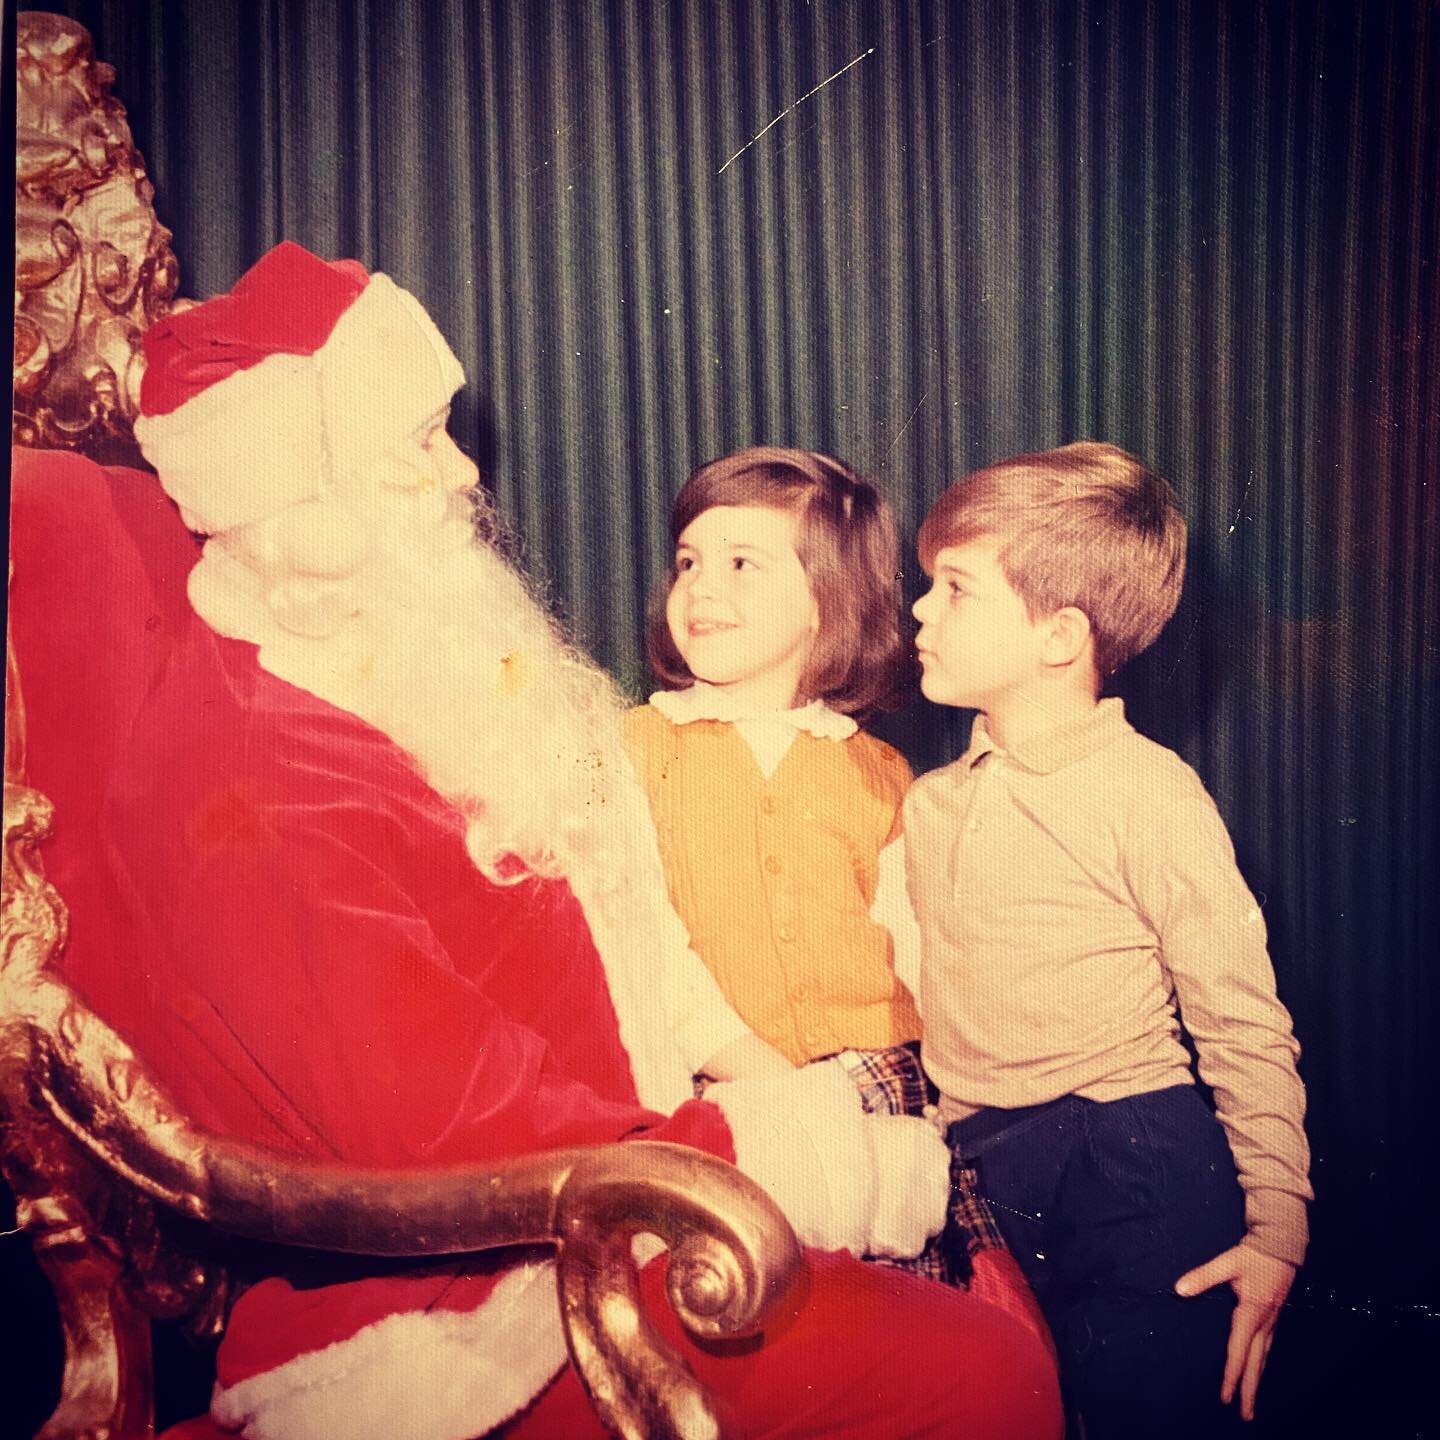 This year&rsquo;s Christmas card. Me with my older brother (looking very serious) at one of those sinister Santa sittings we were forced to endure back in the day. 

How&rsquo;re your holidays looking?